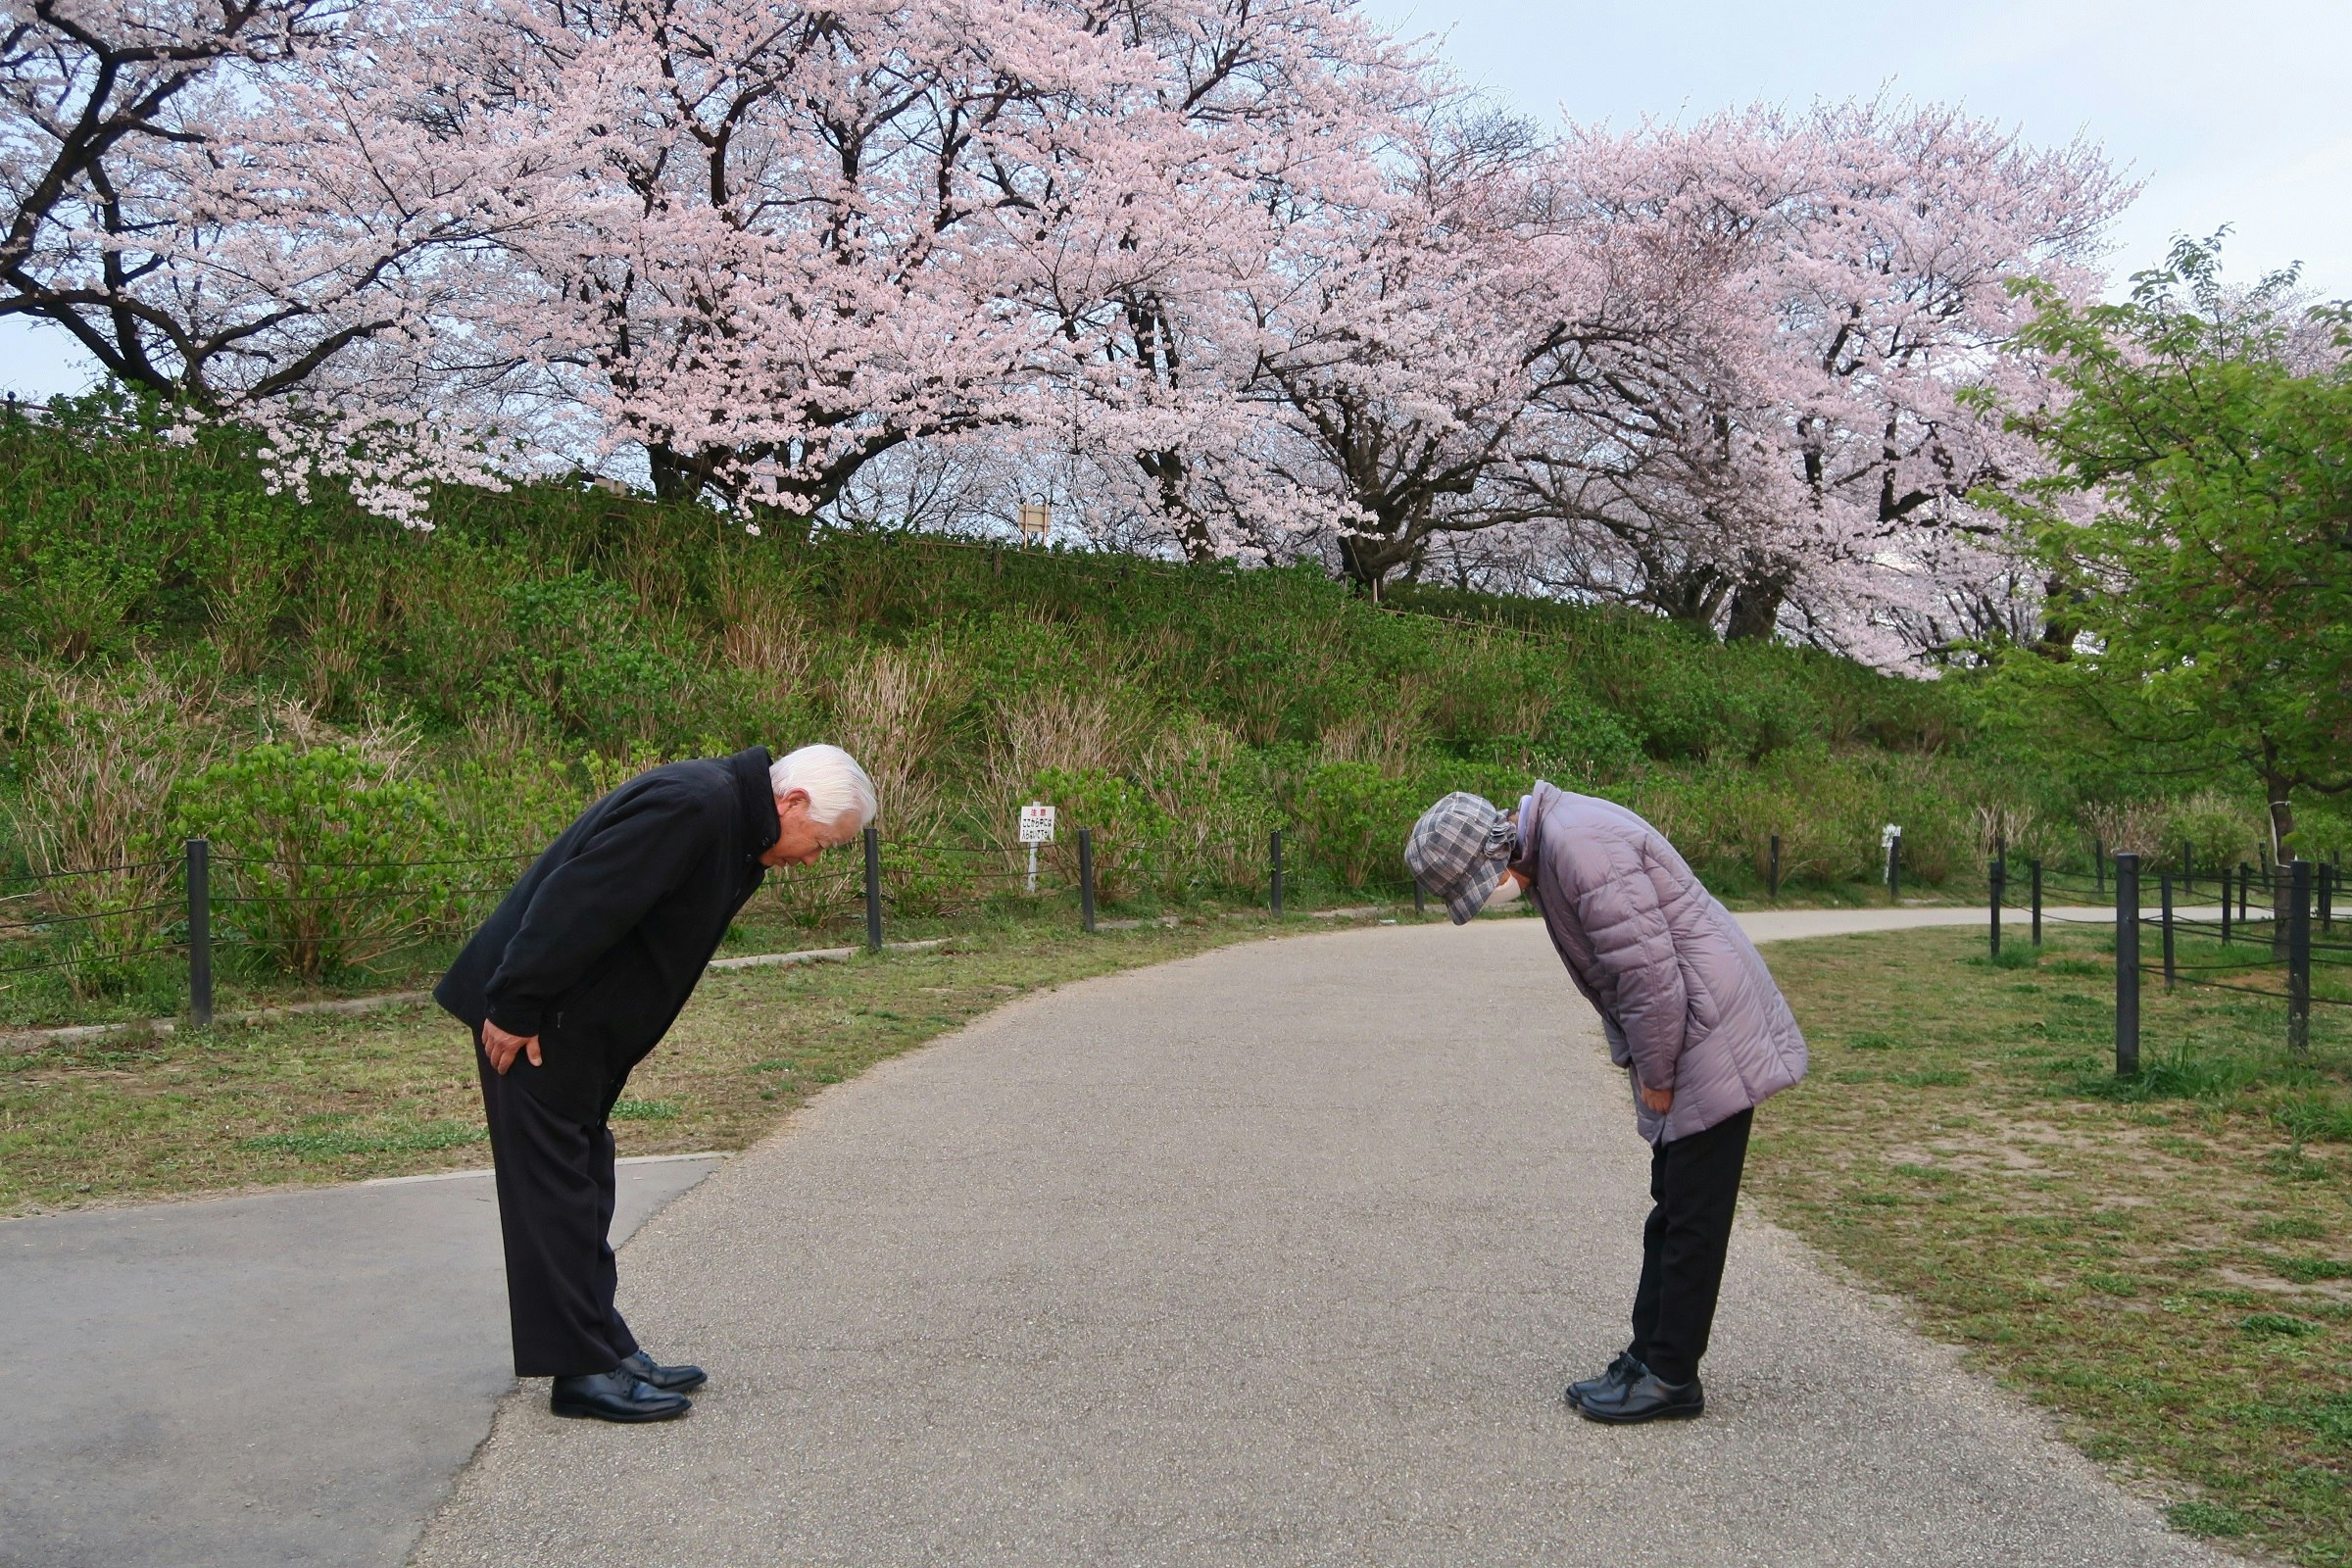 People bowing in a park